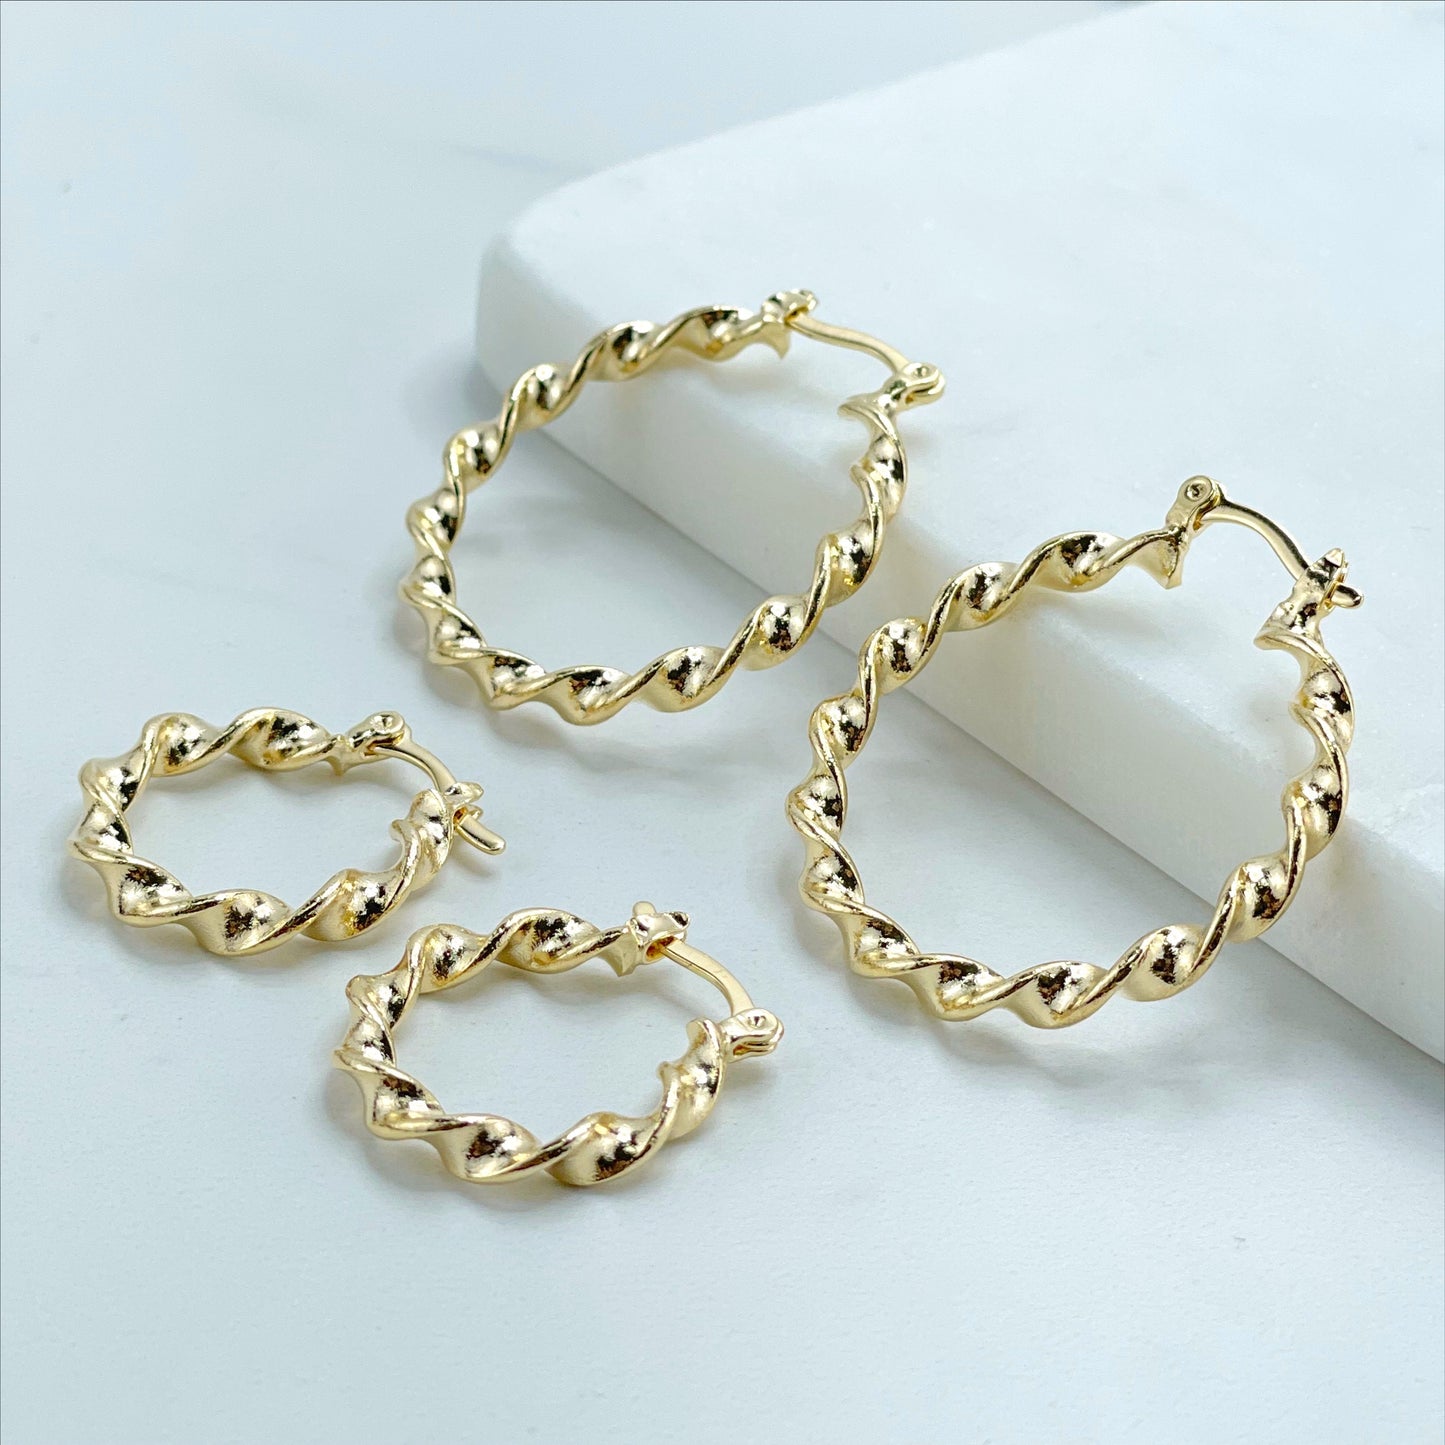 18k Gold Filled 20 or 30mm Twisted Hoop Earrings, Push Back Closure, Wholesale Jewelry Supplies